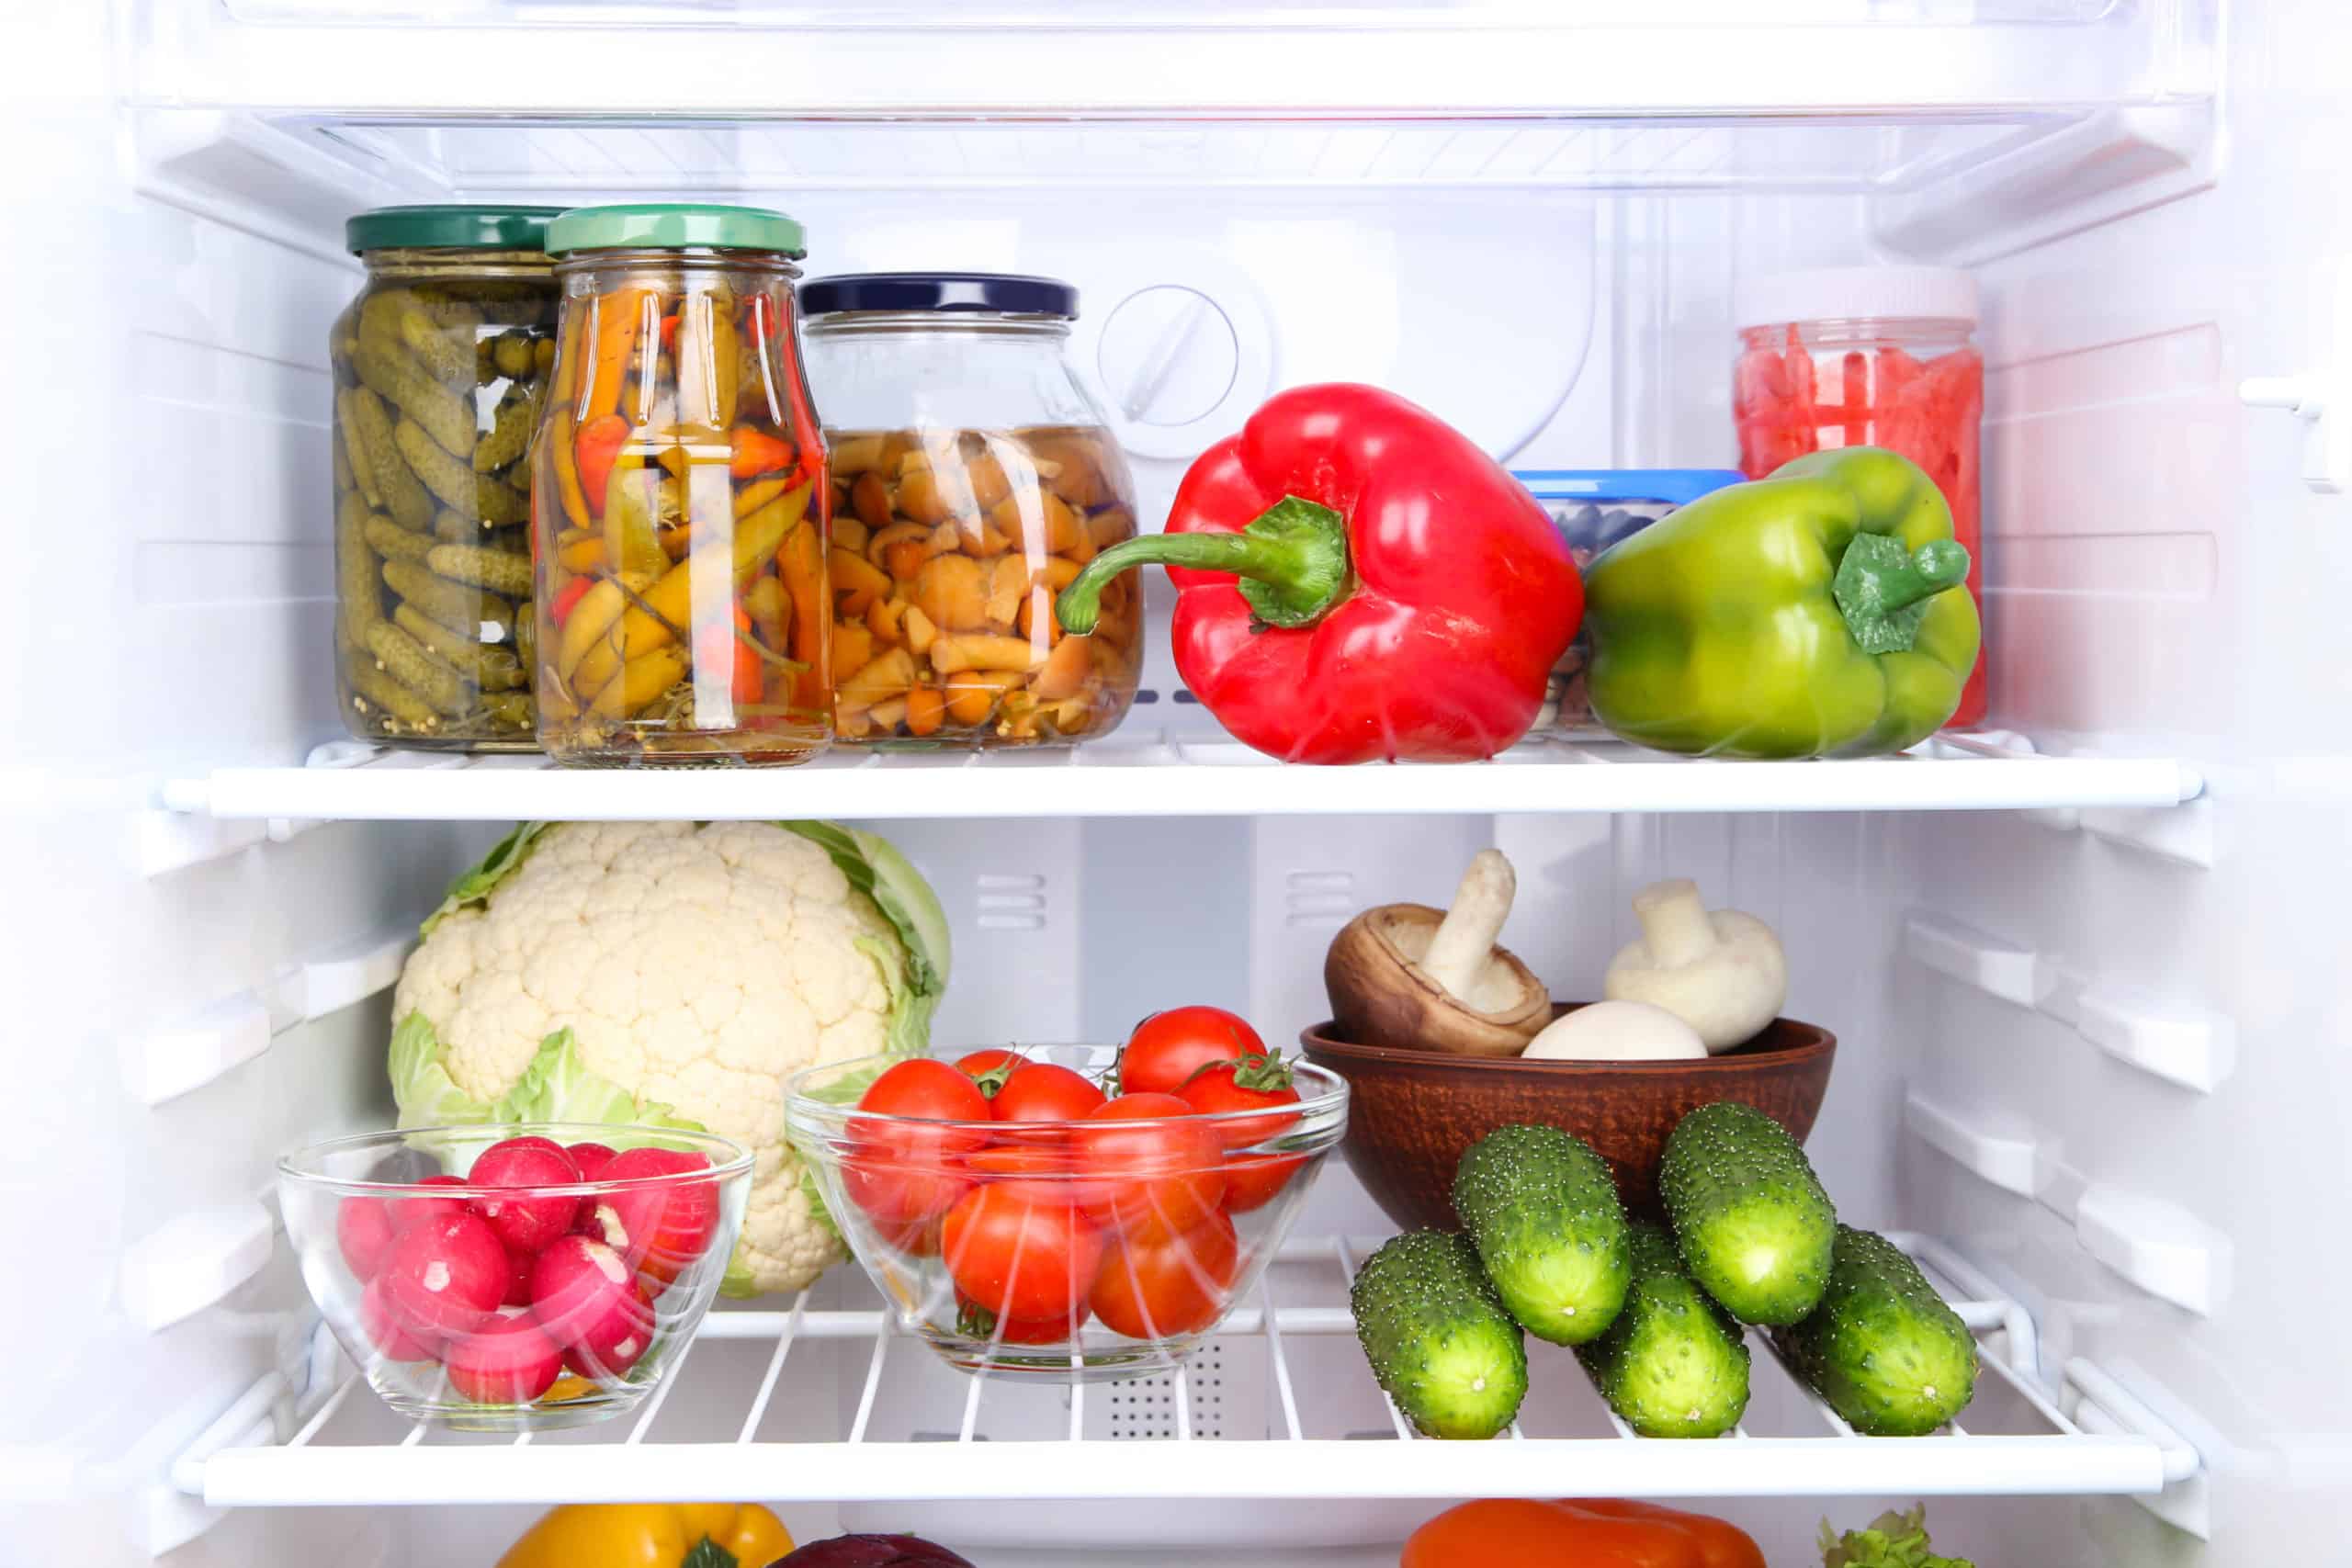 A List of Healthy Refrigerator Staples